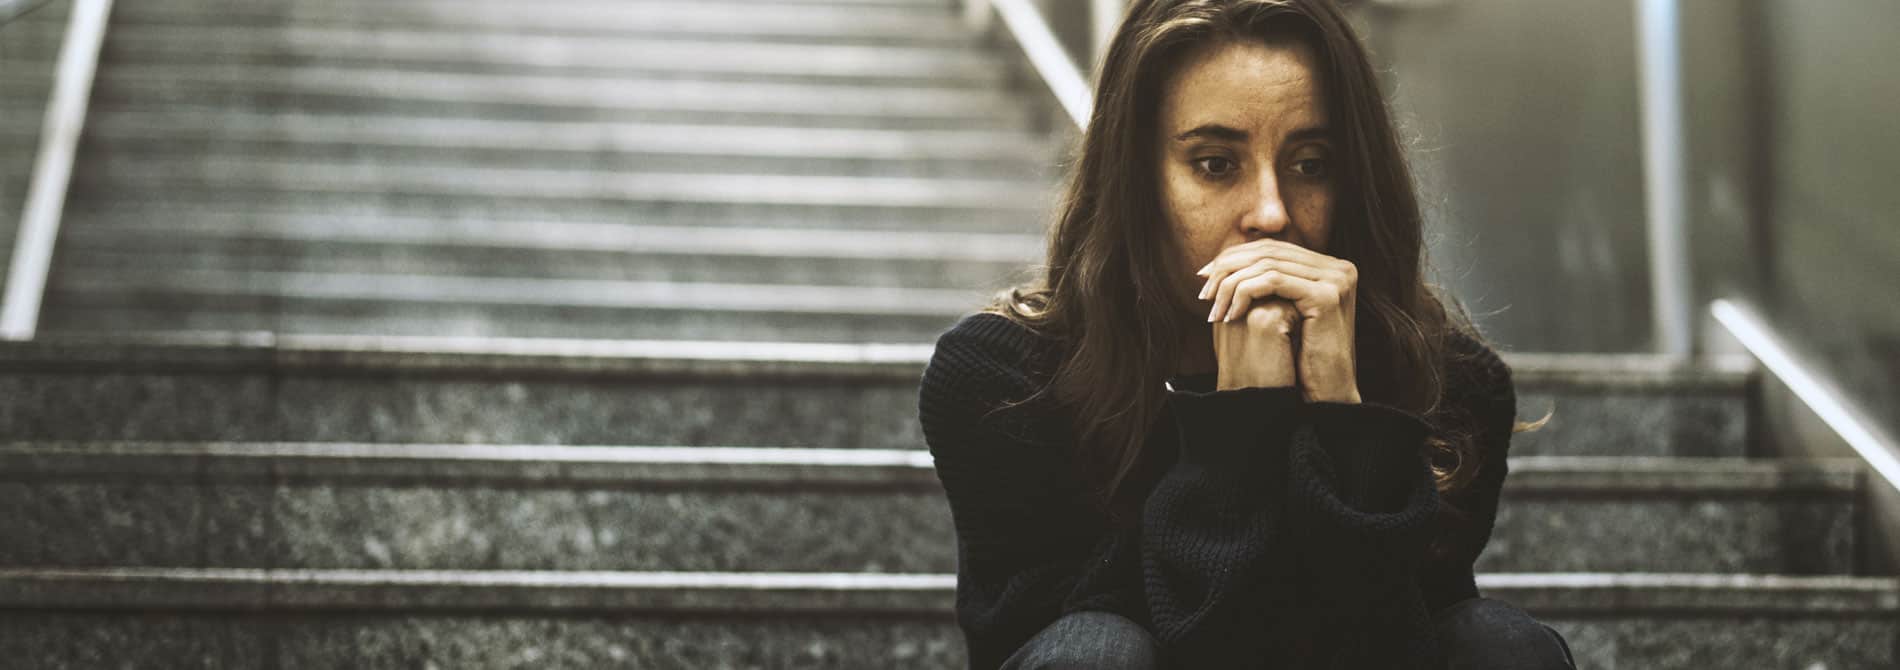 How Low Self-Esteem Can Lead to Substance Abuse in Women